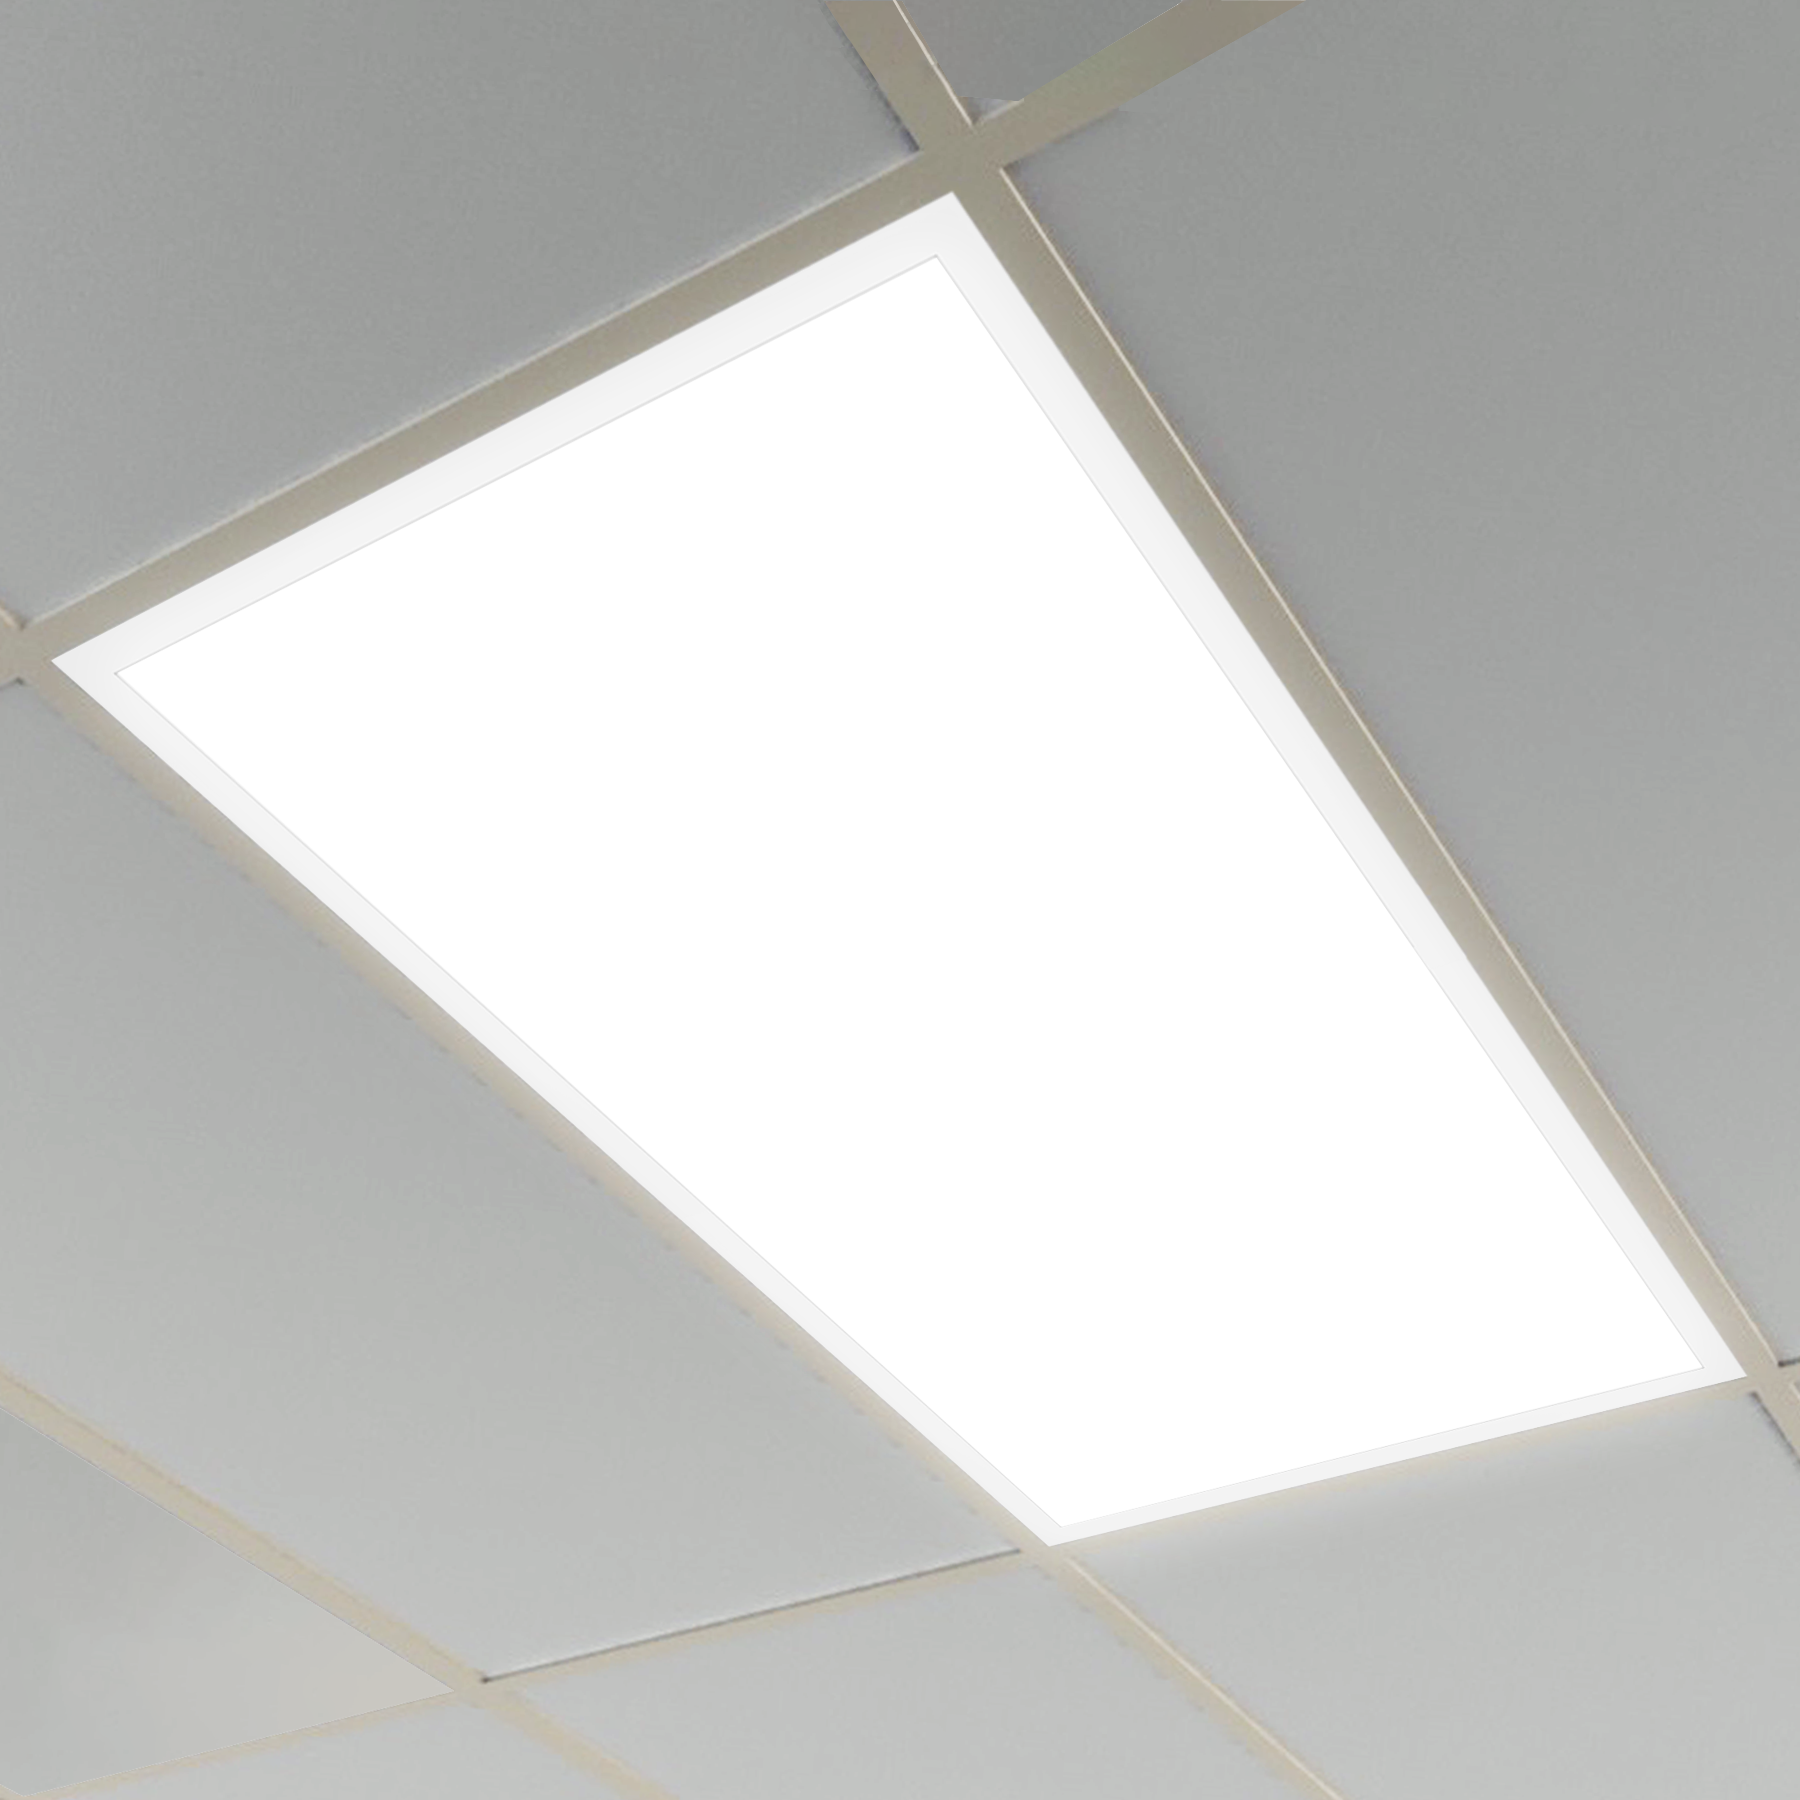 LED Flat Panel Lights and Fixtures